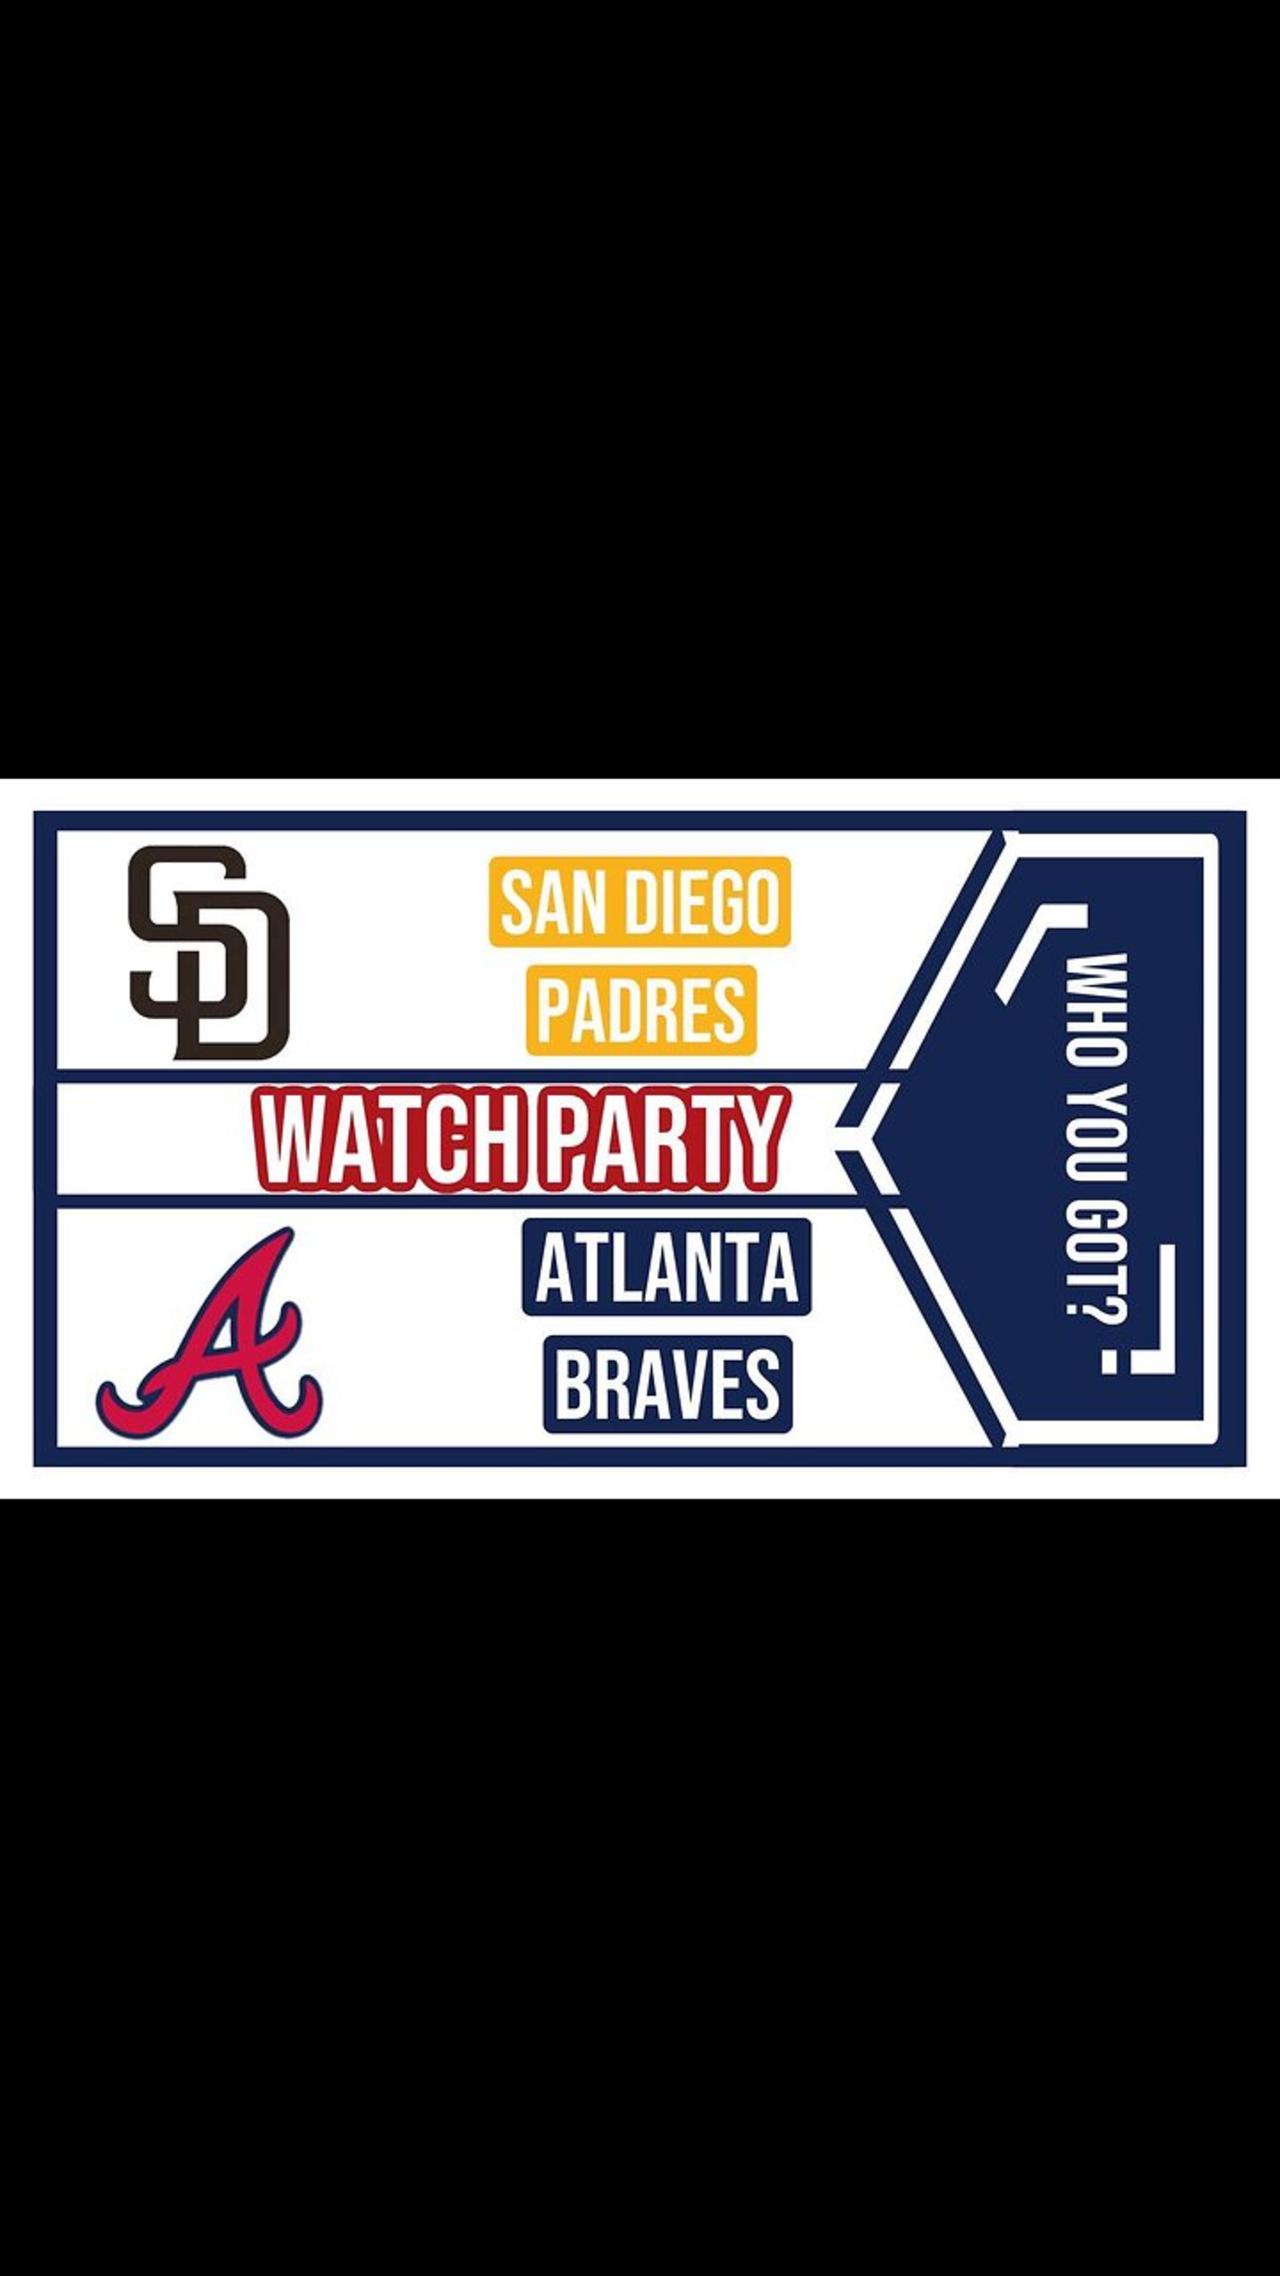 Join The Excitement: Atlanta Braves vs San Diego Padres game 3 Live Watch Party